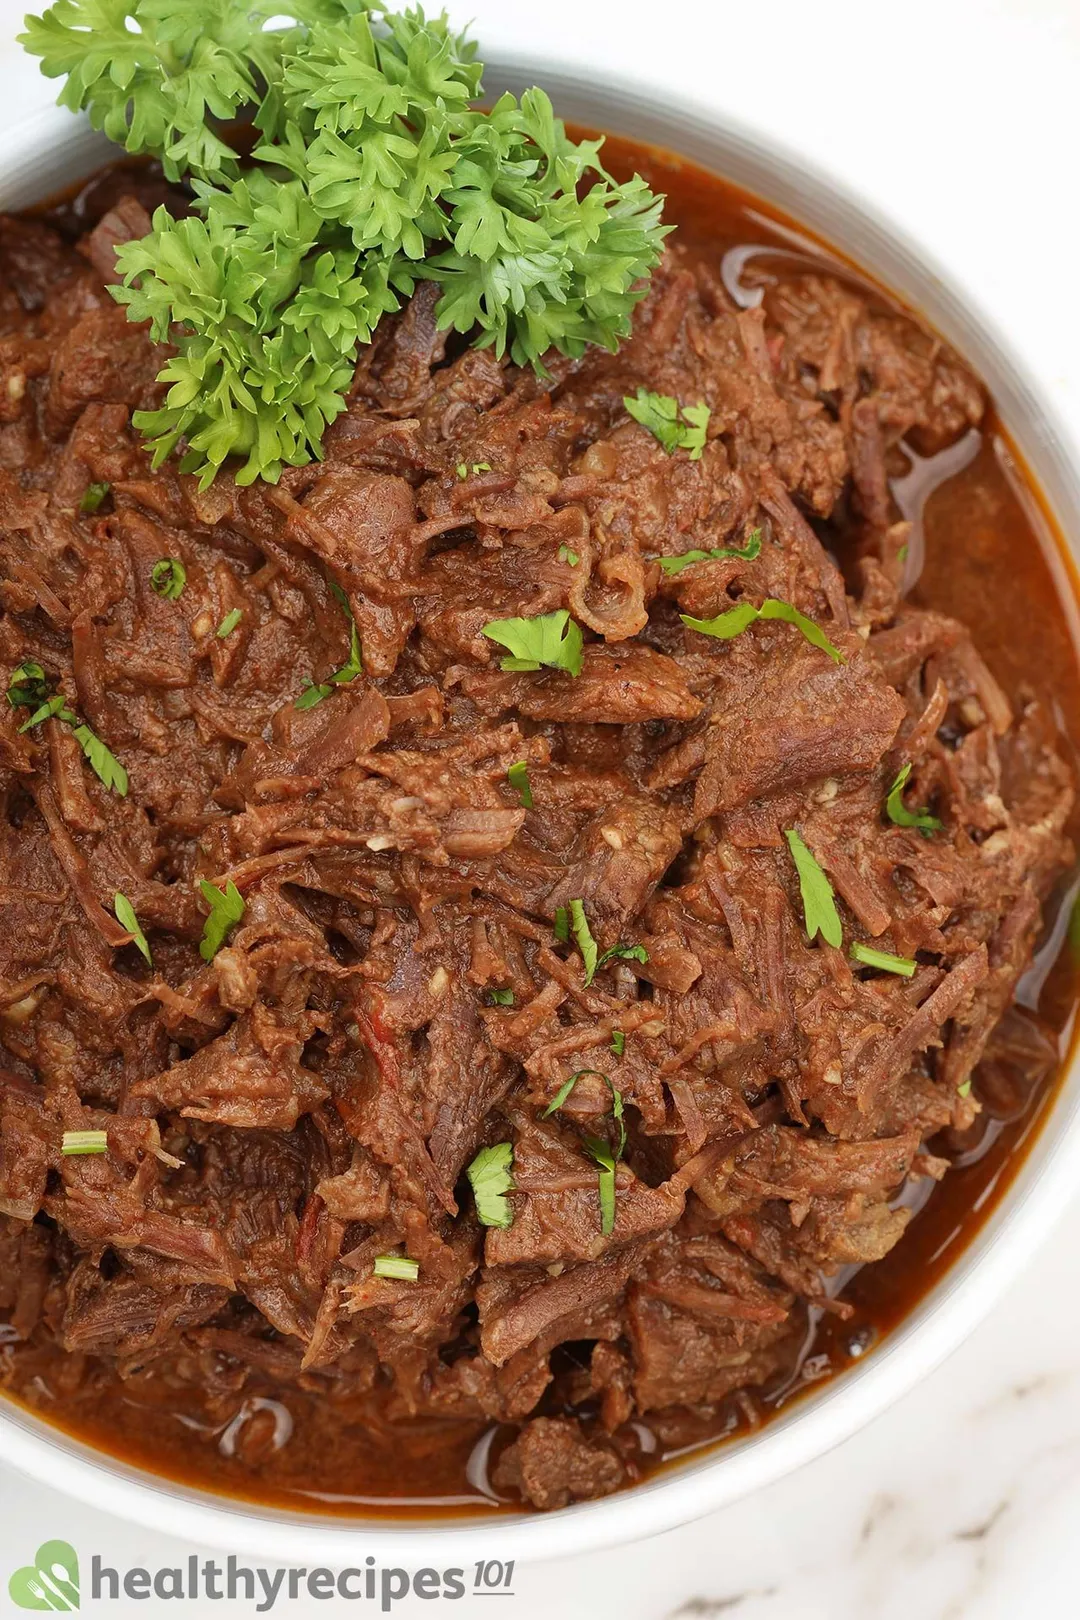 top view of a bowl of cooked shredded beef garnished by parsley